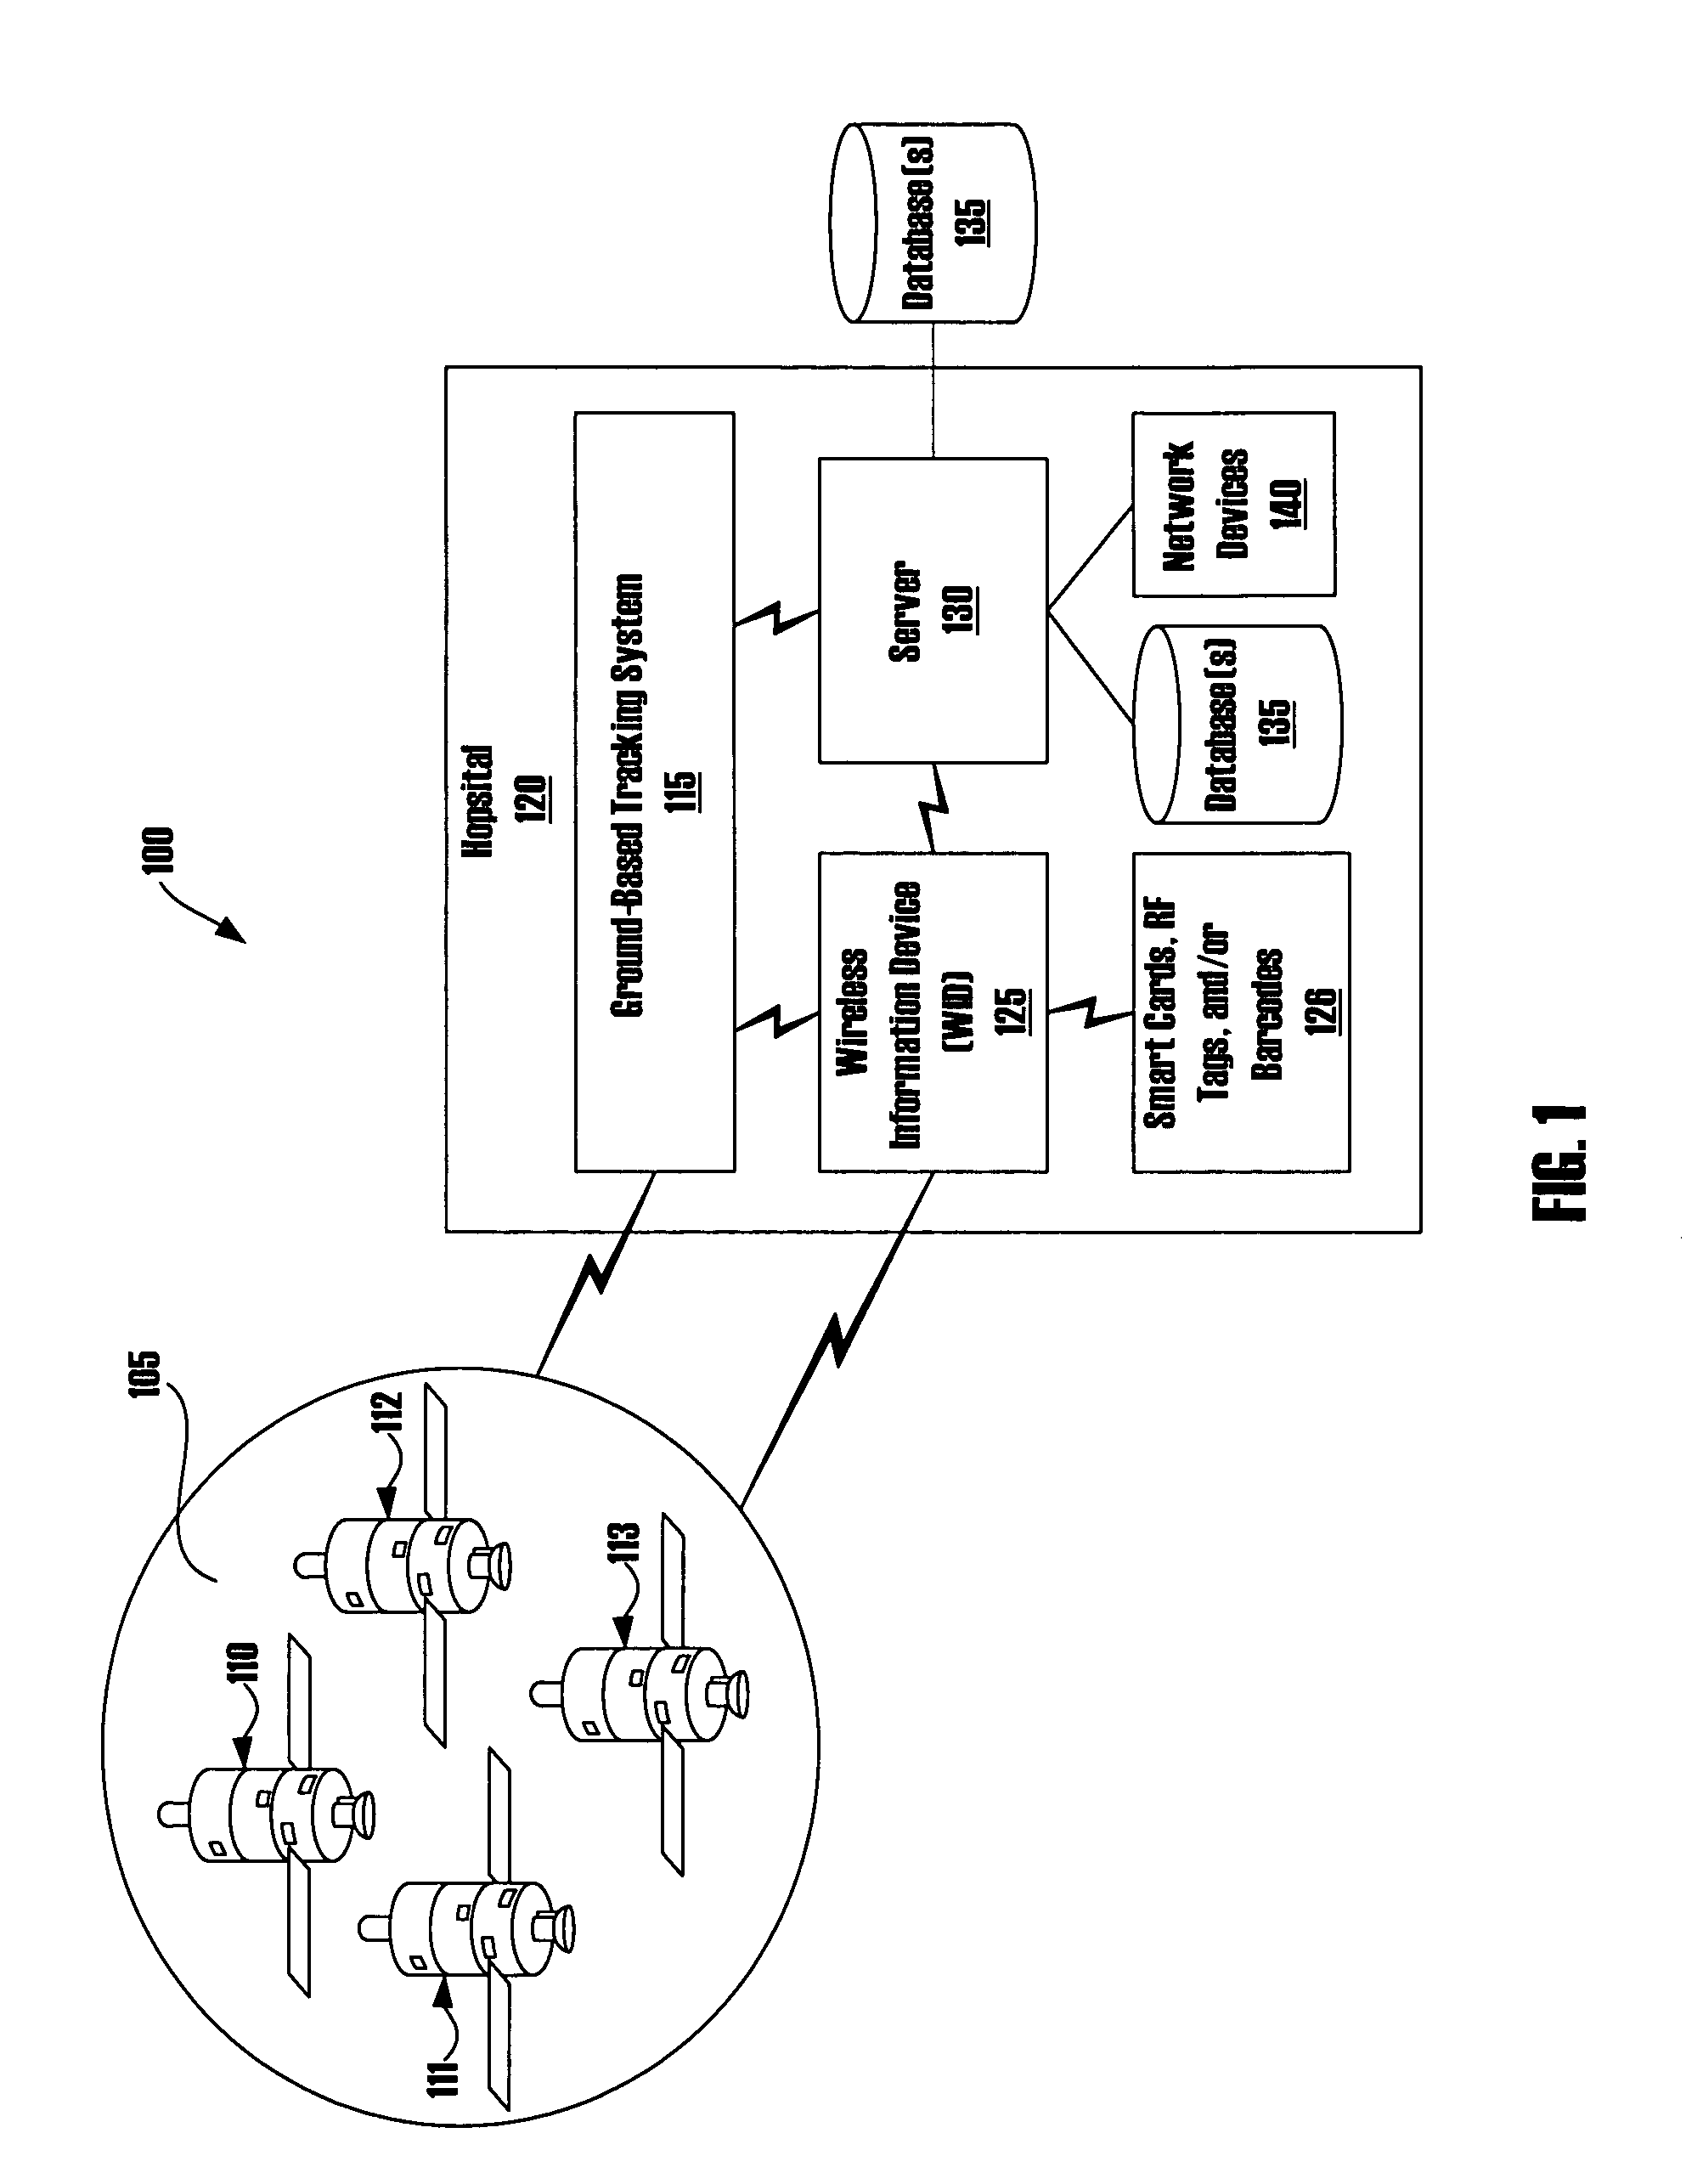 Systems and methods for context relevant information management and display